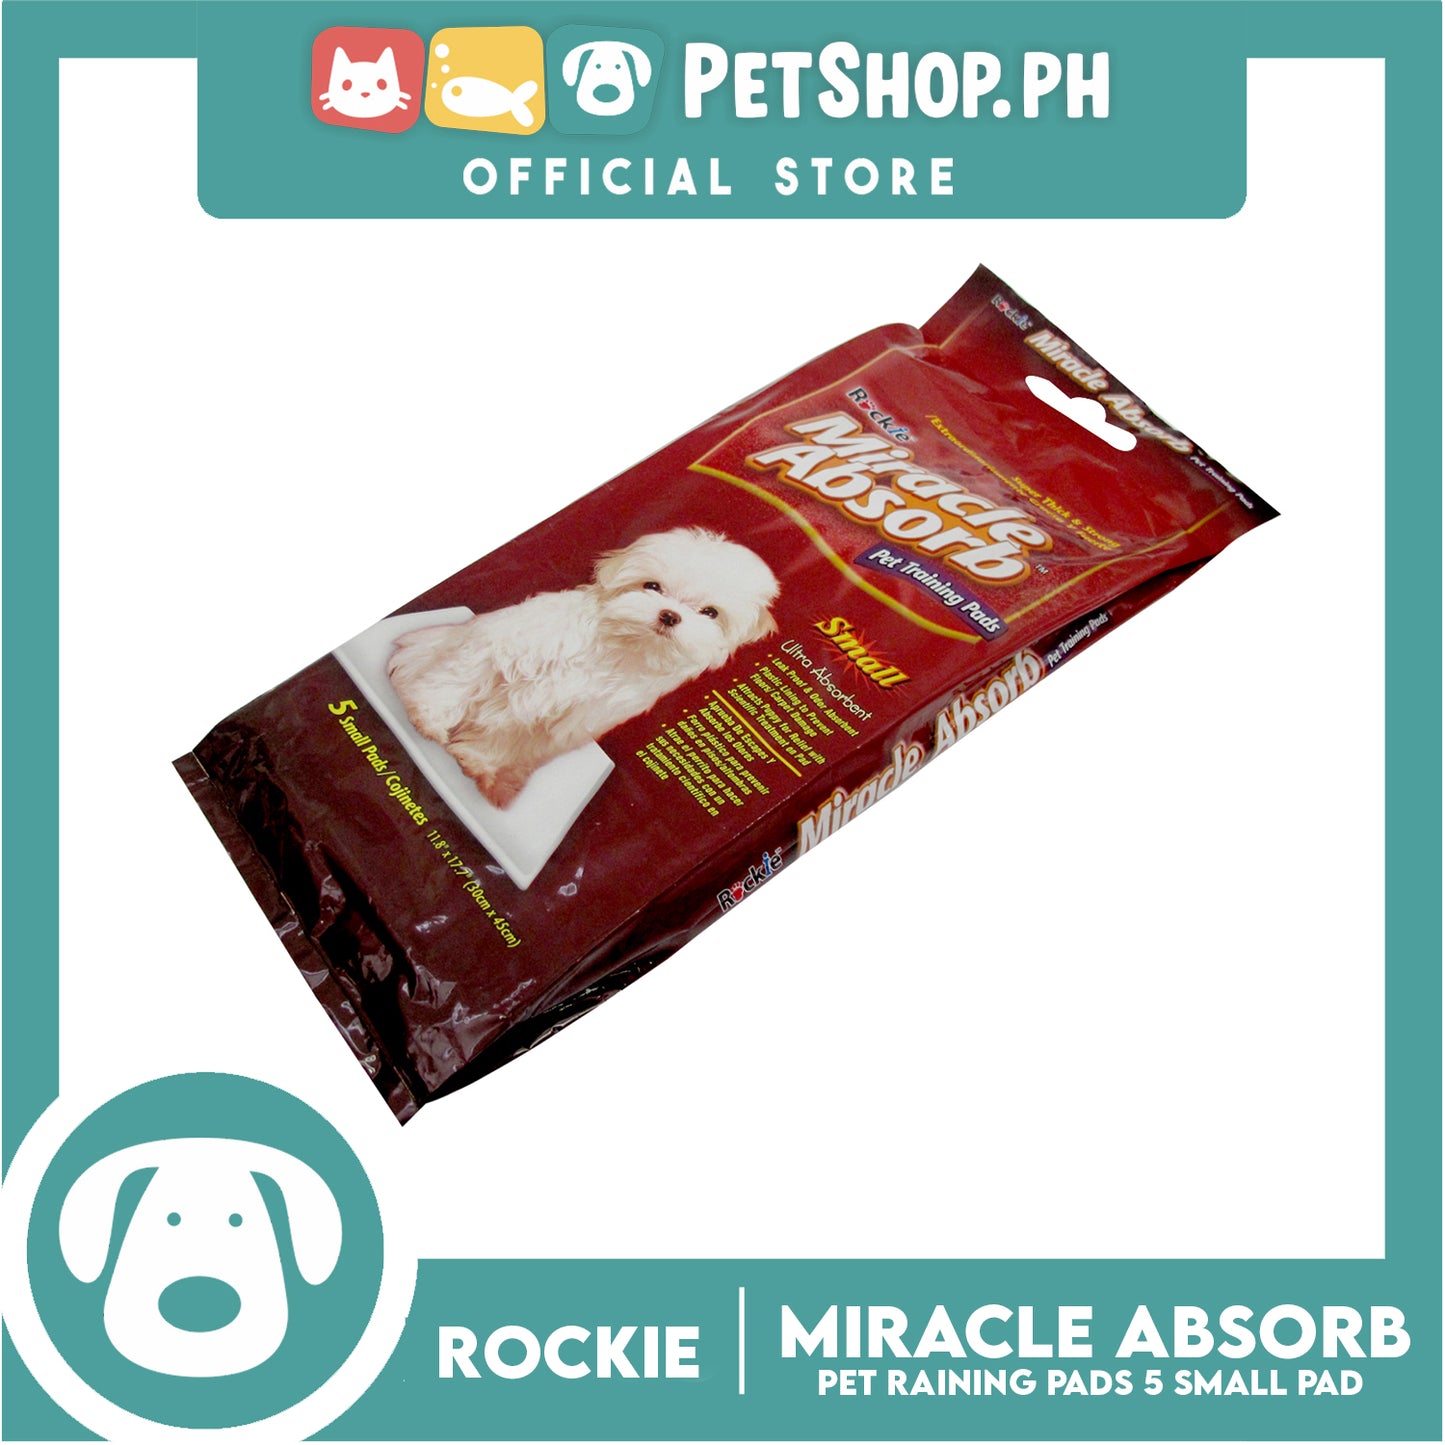 Rockie Miracle Absorb Pet Training Pads 5 Small Pads Ultra Absorbent